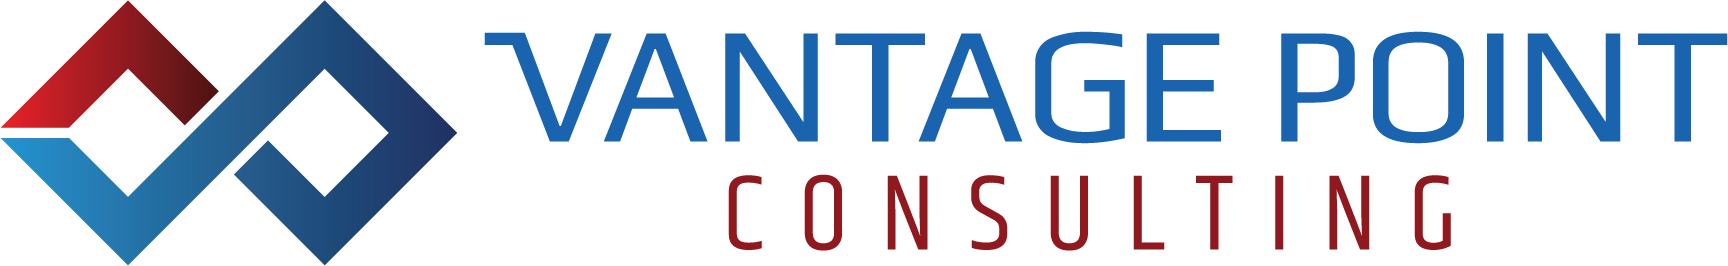 VantagePoint Consulting